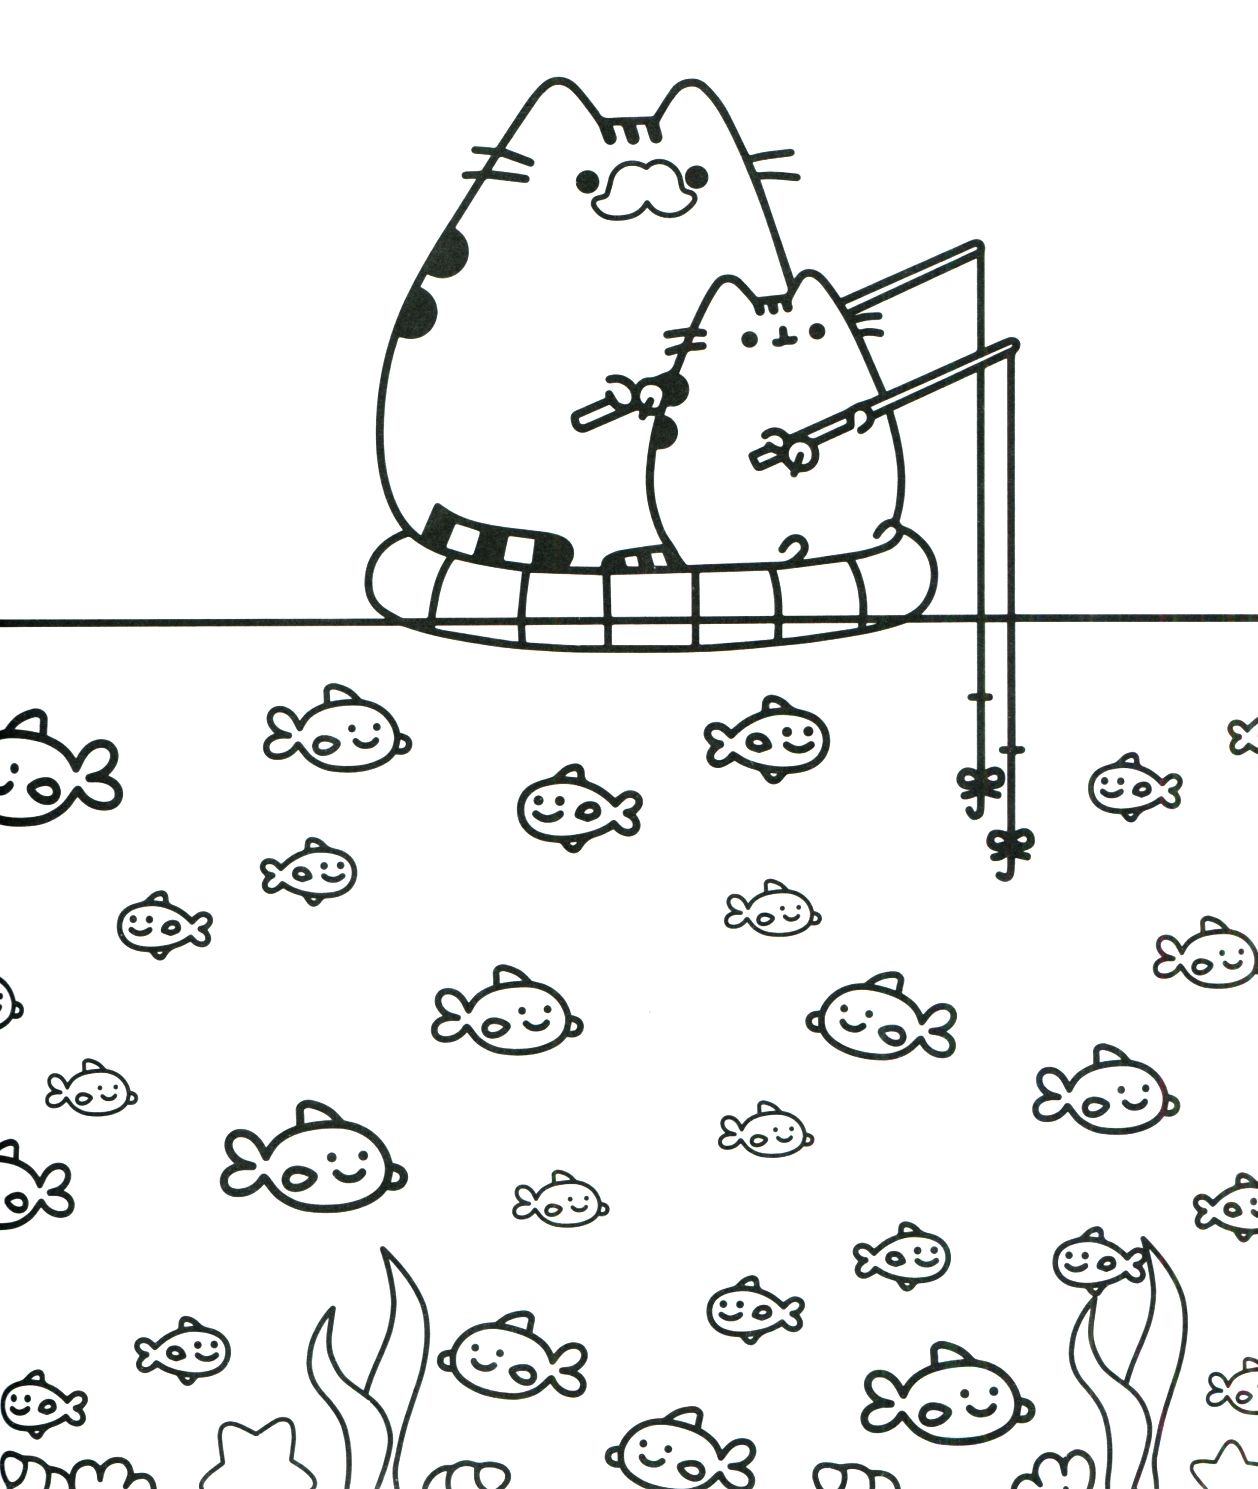 Pusheen Unicorn Coloring Pages at GetColorings.com   Free ...